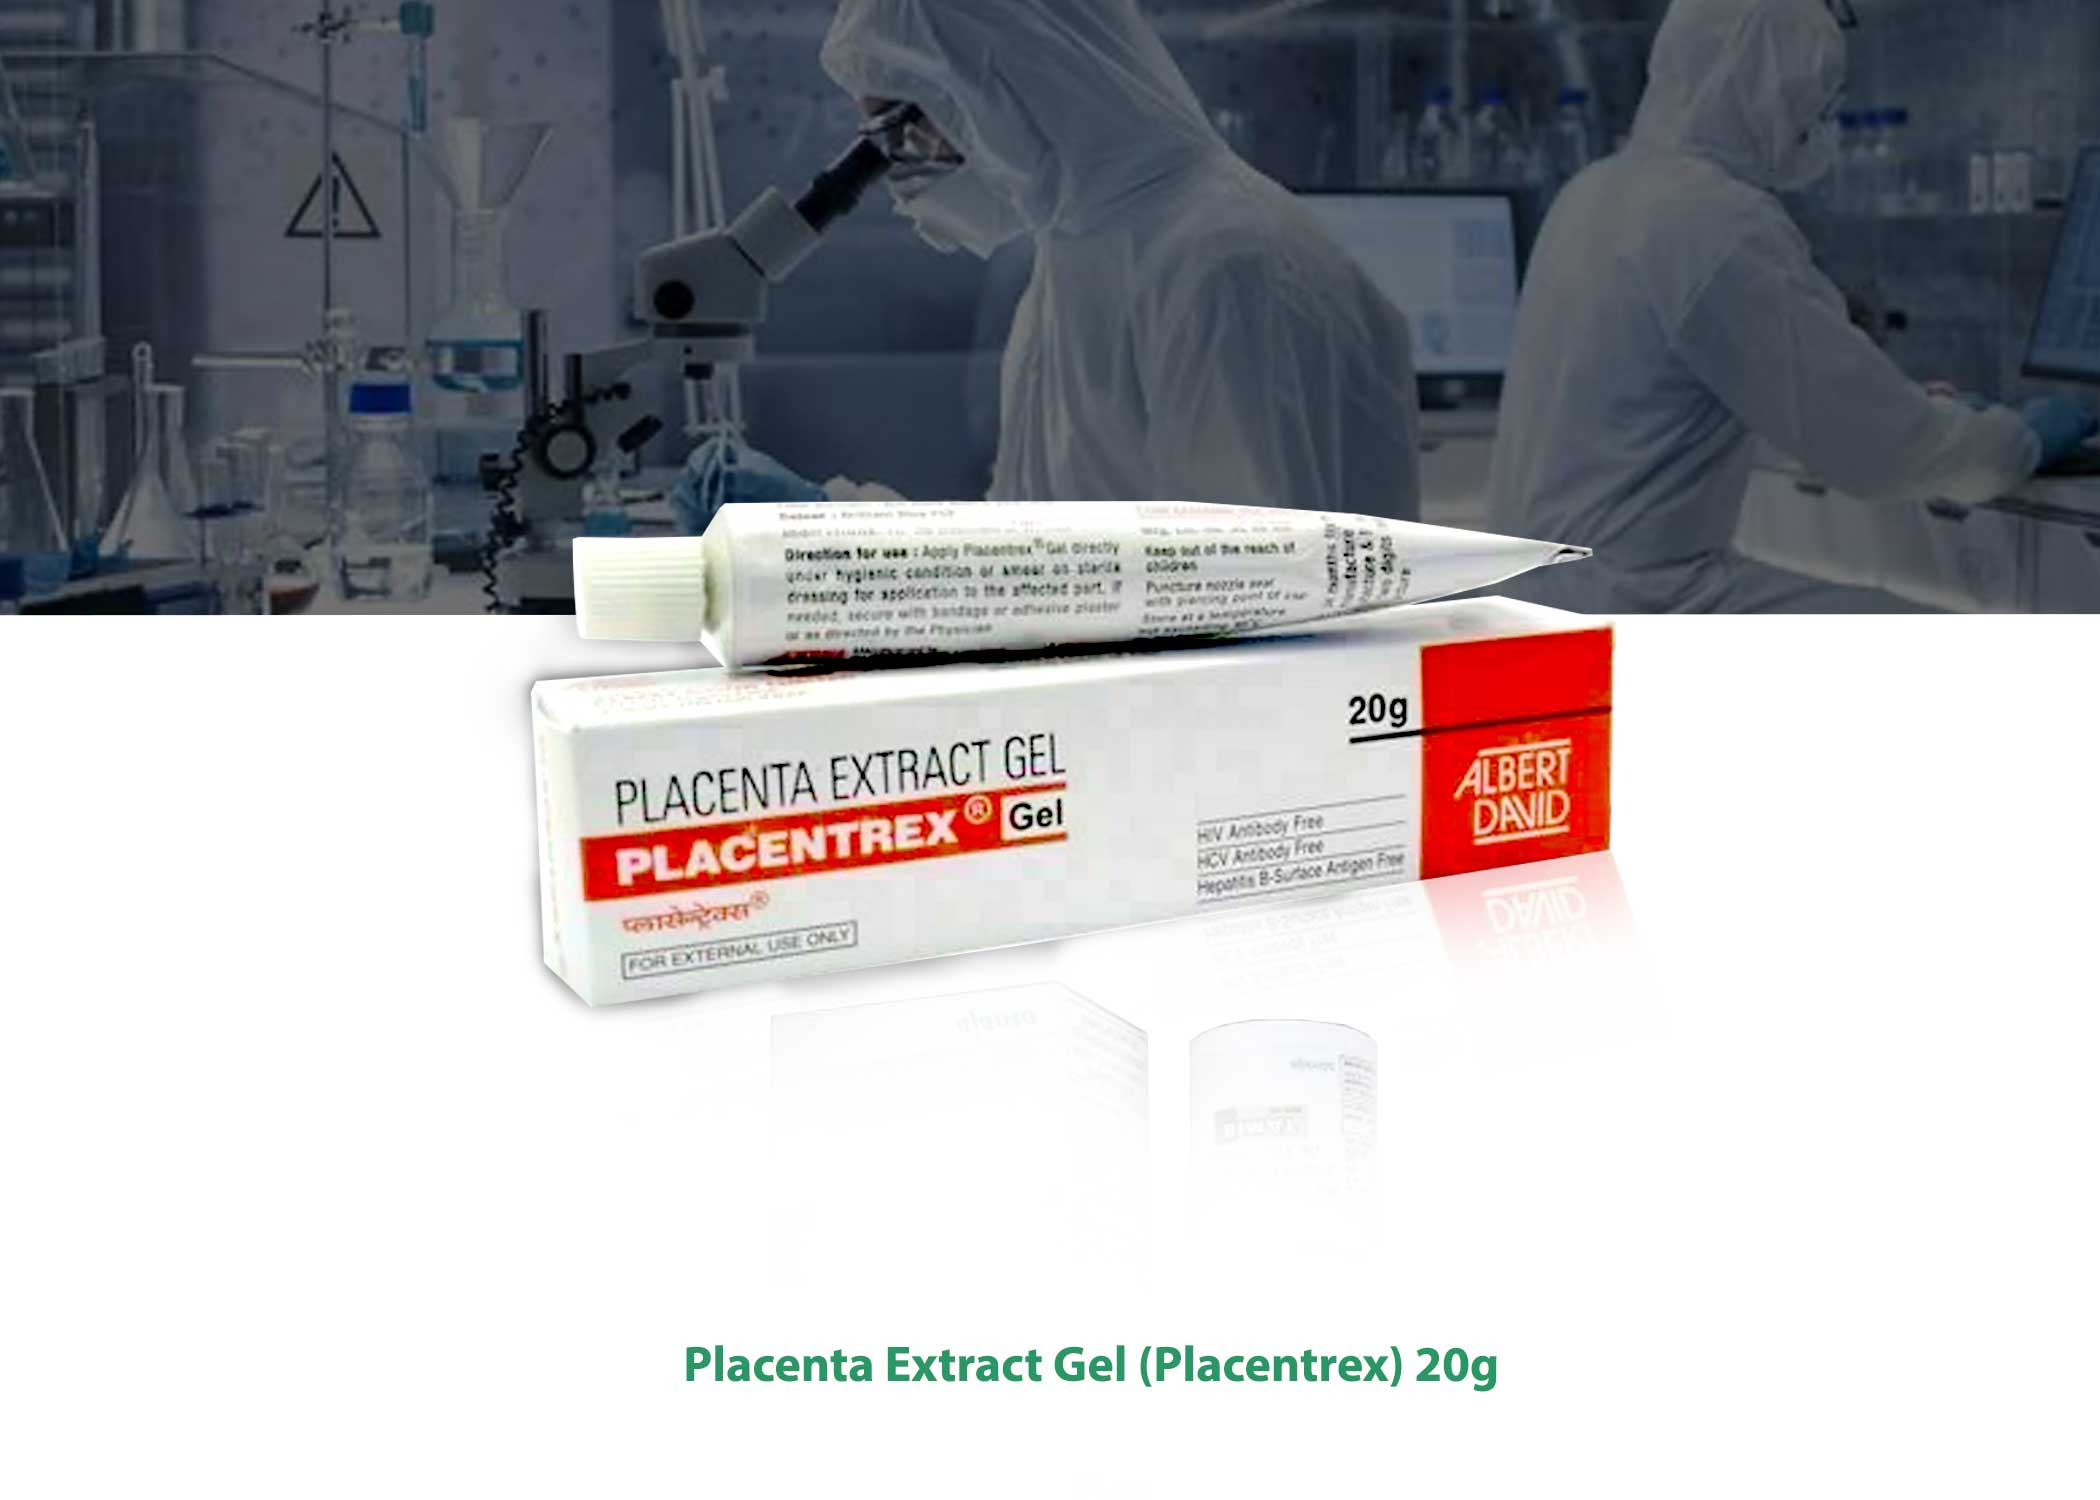 Placenta Extract Gel Placentrex 20g